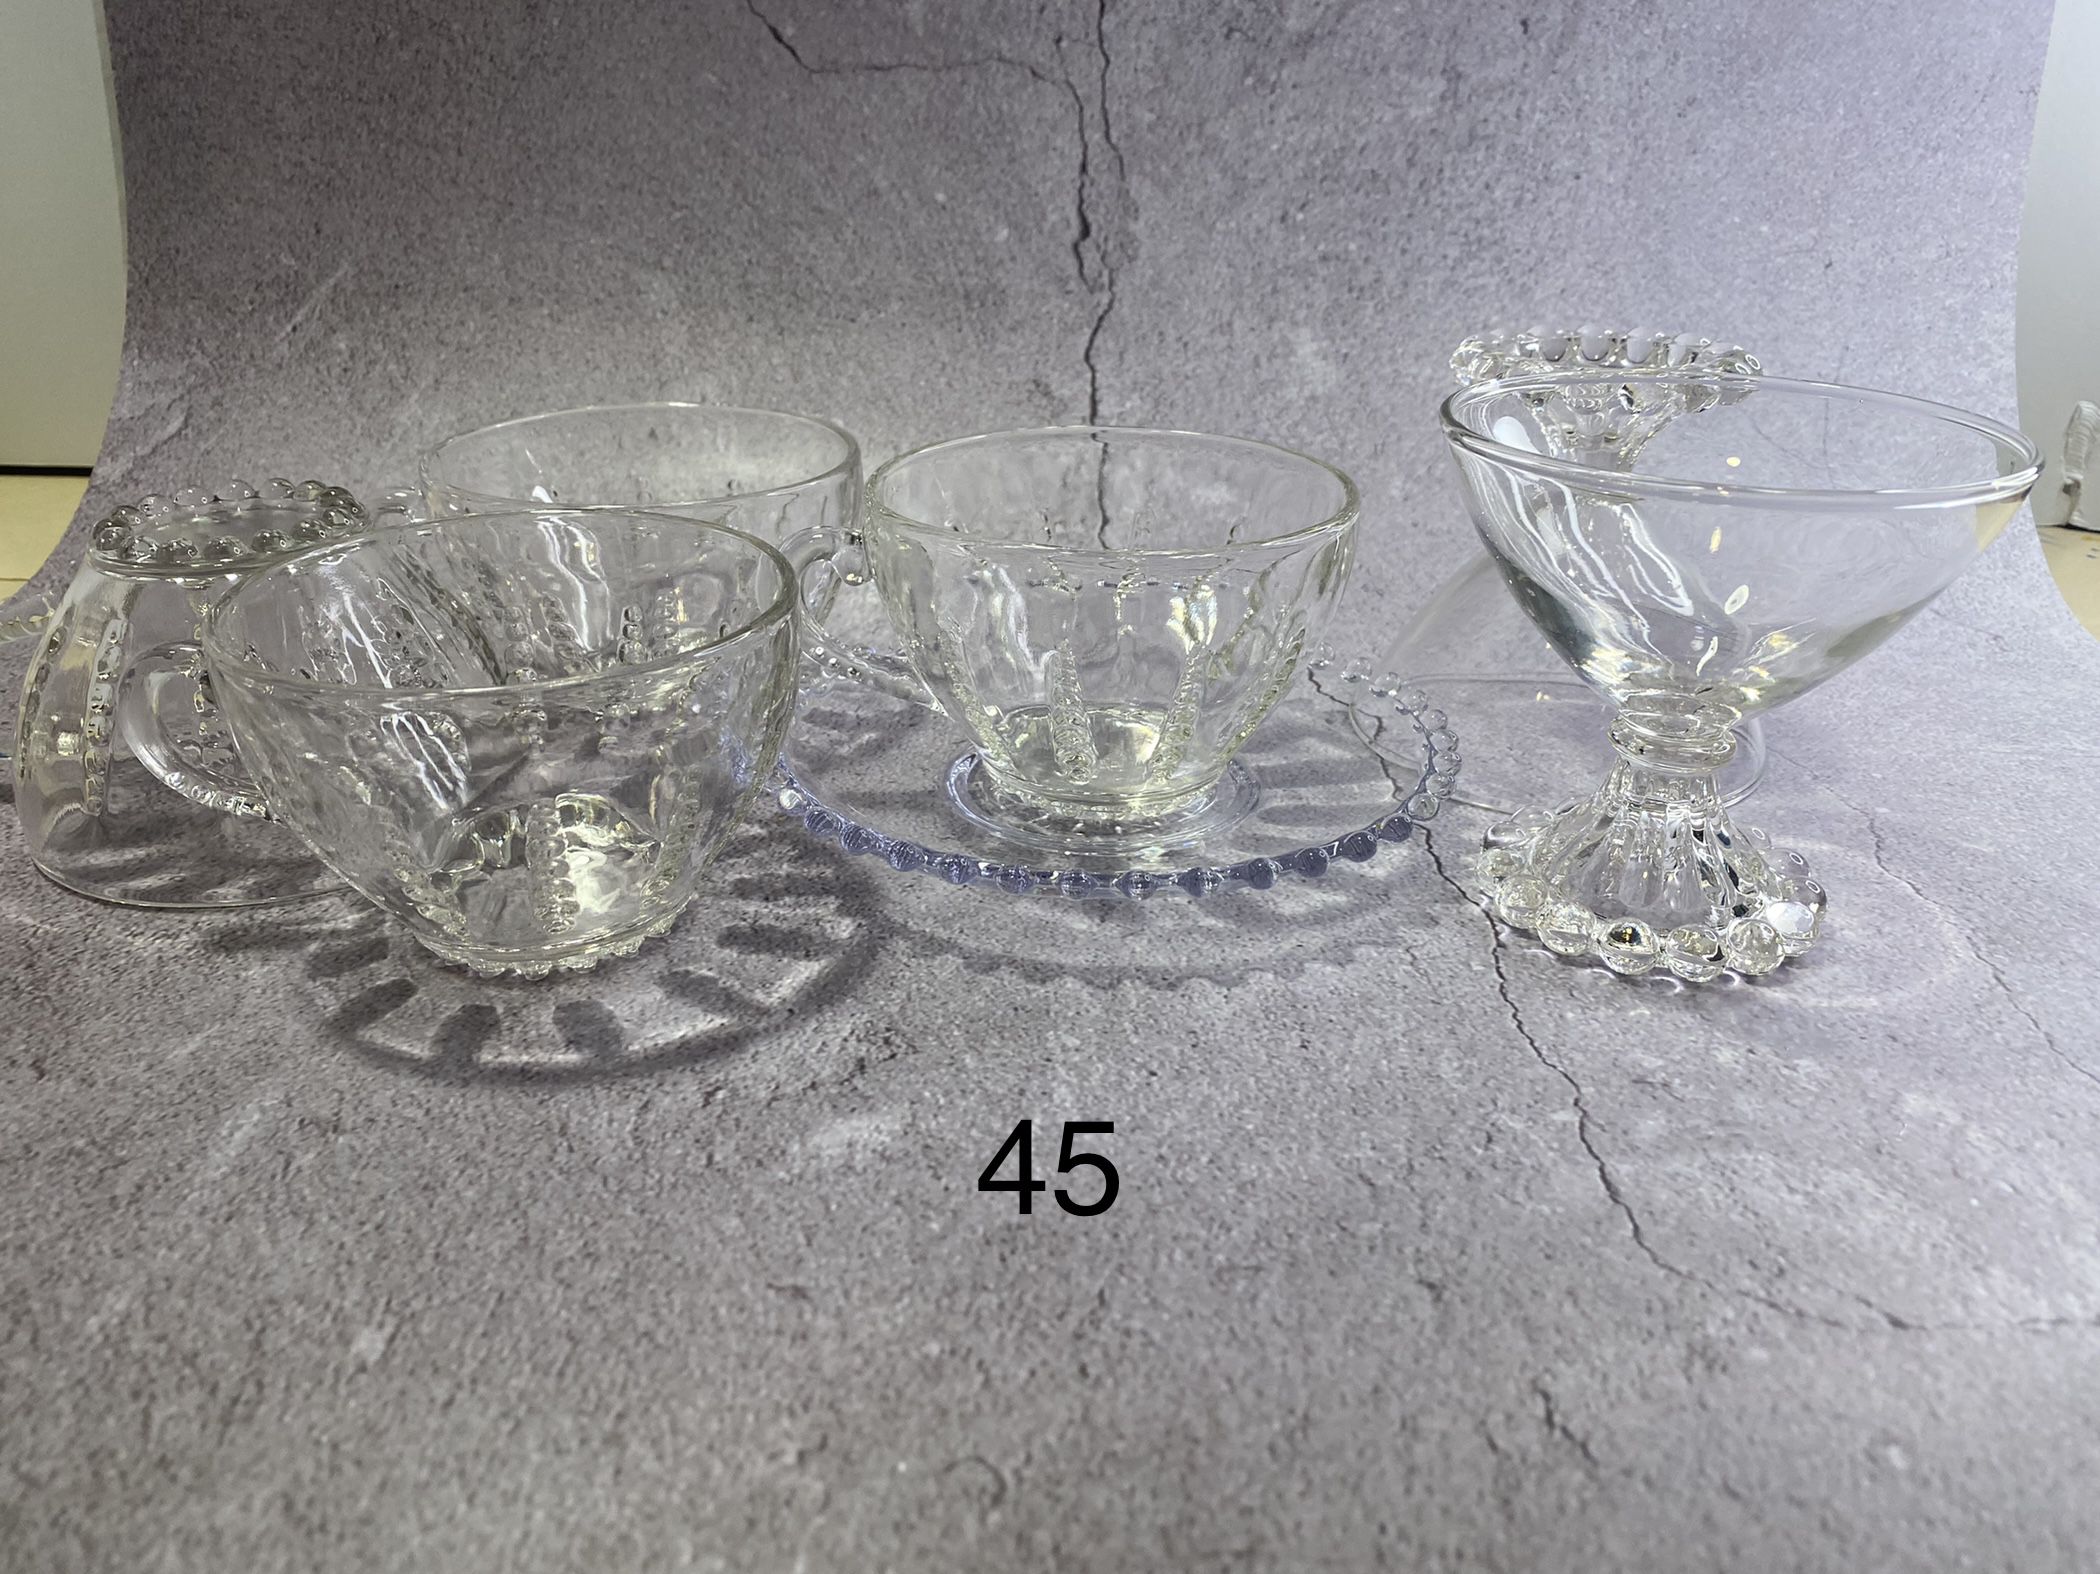 (7) Pieces Of Beautiful Vintage Glassware. Sold Separately. Price 1 For $9. 2 For $ 16. 3 For $ 21.  Whole lot for $ 40.